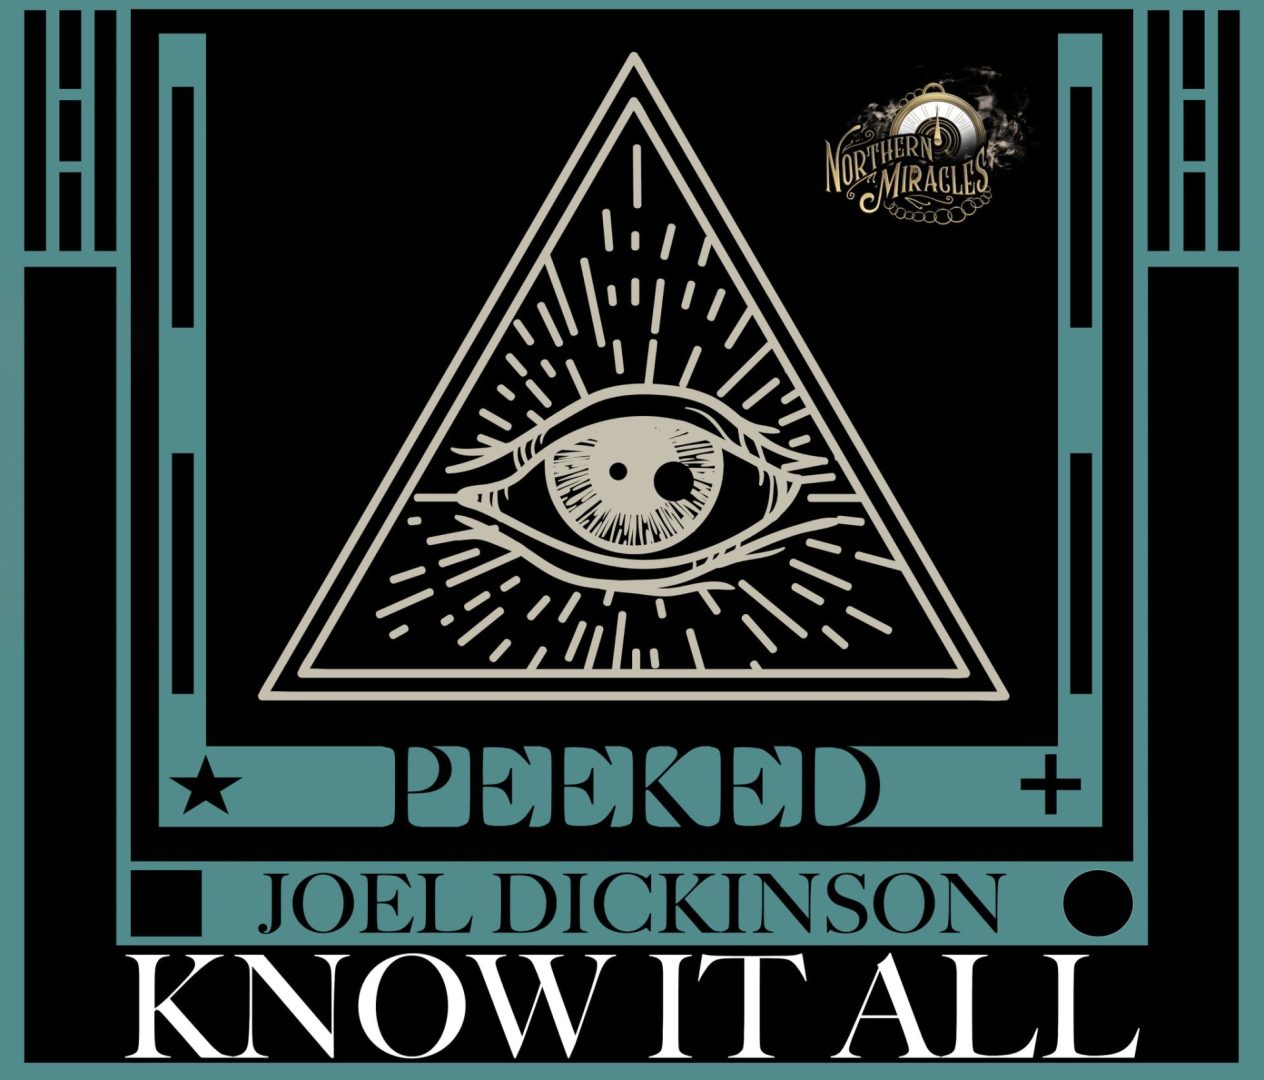 Peeked by Joel Dickinson (MP4 Video Download 1080p FullHD Quality)